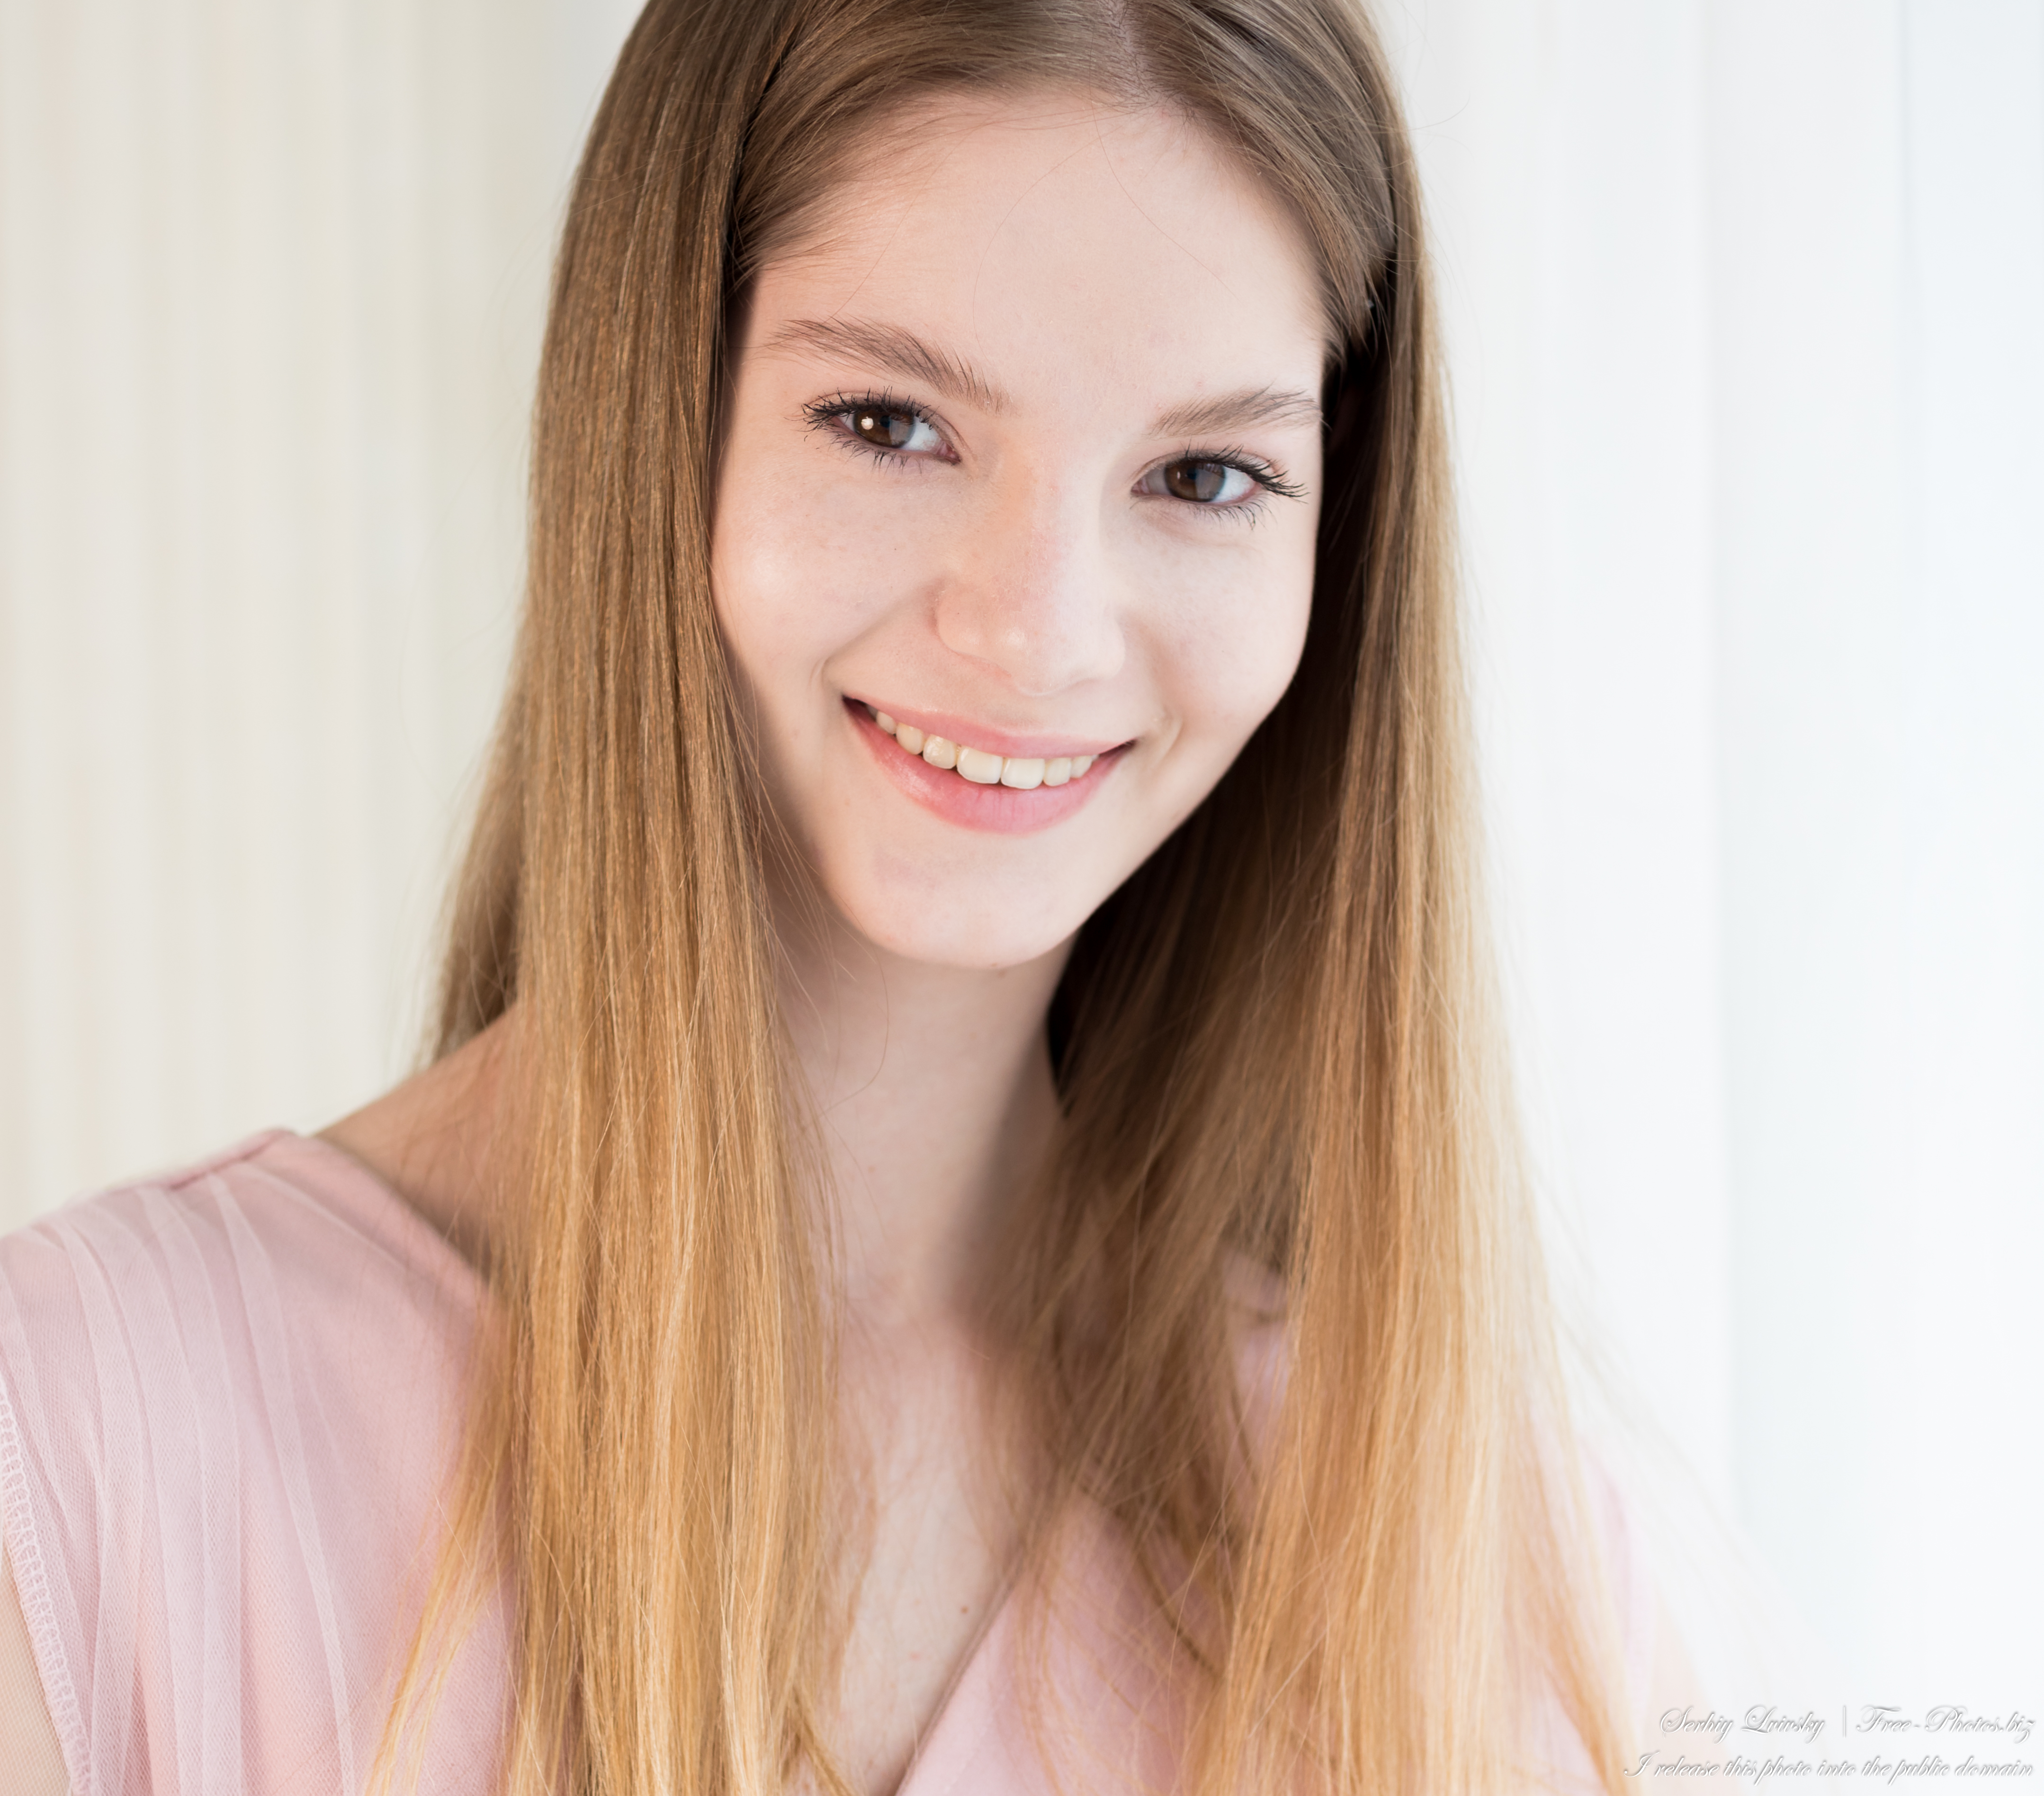 Vika - an 18-year-old girl with natural fair hair photographed in March 2023 by Serhiy Lvivsky, picture 31